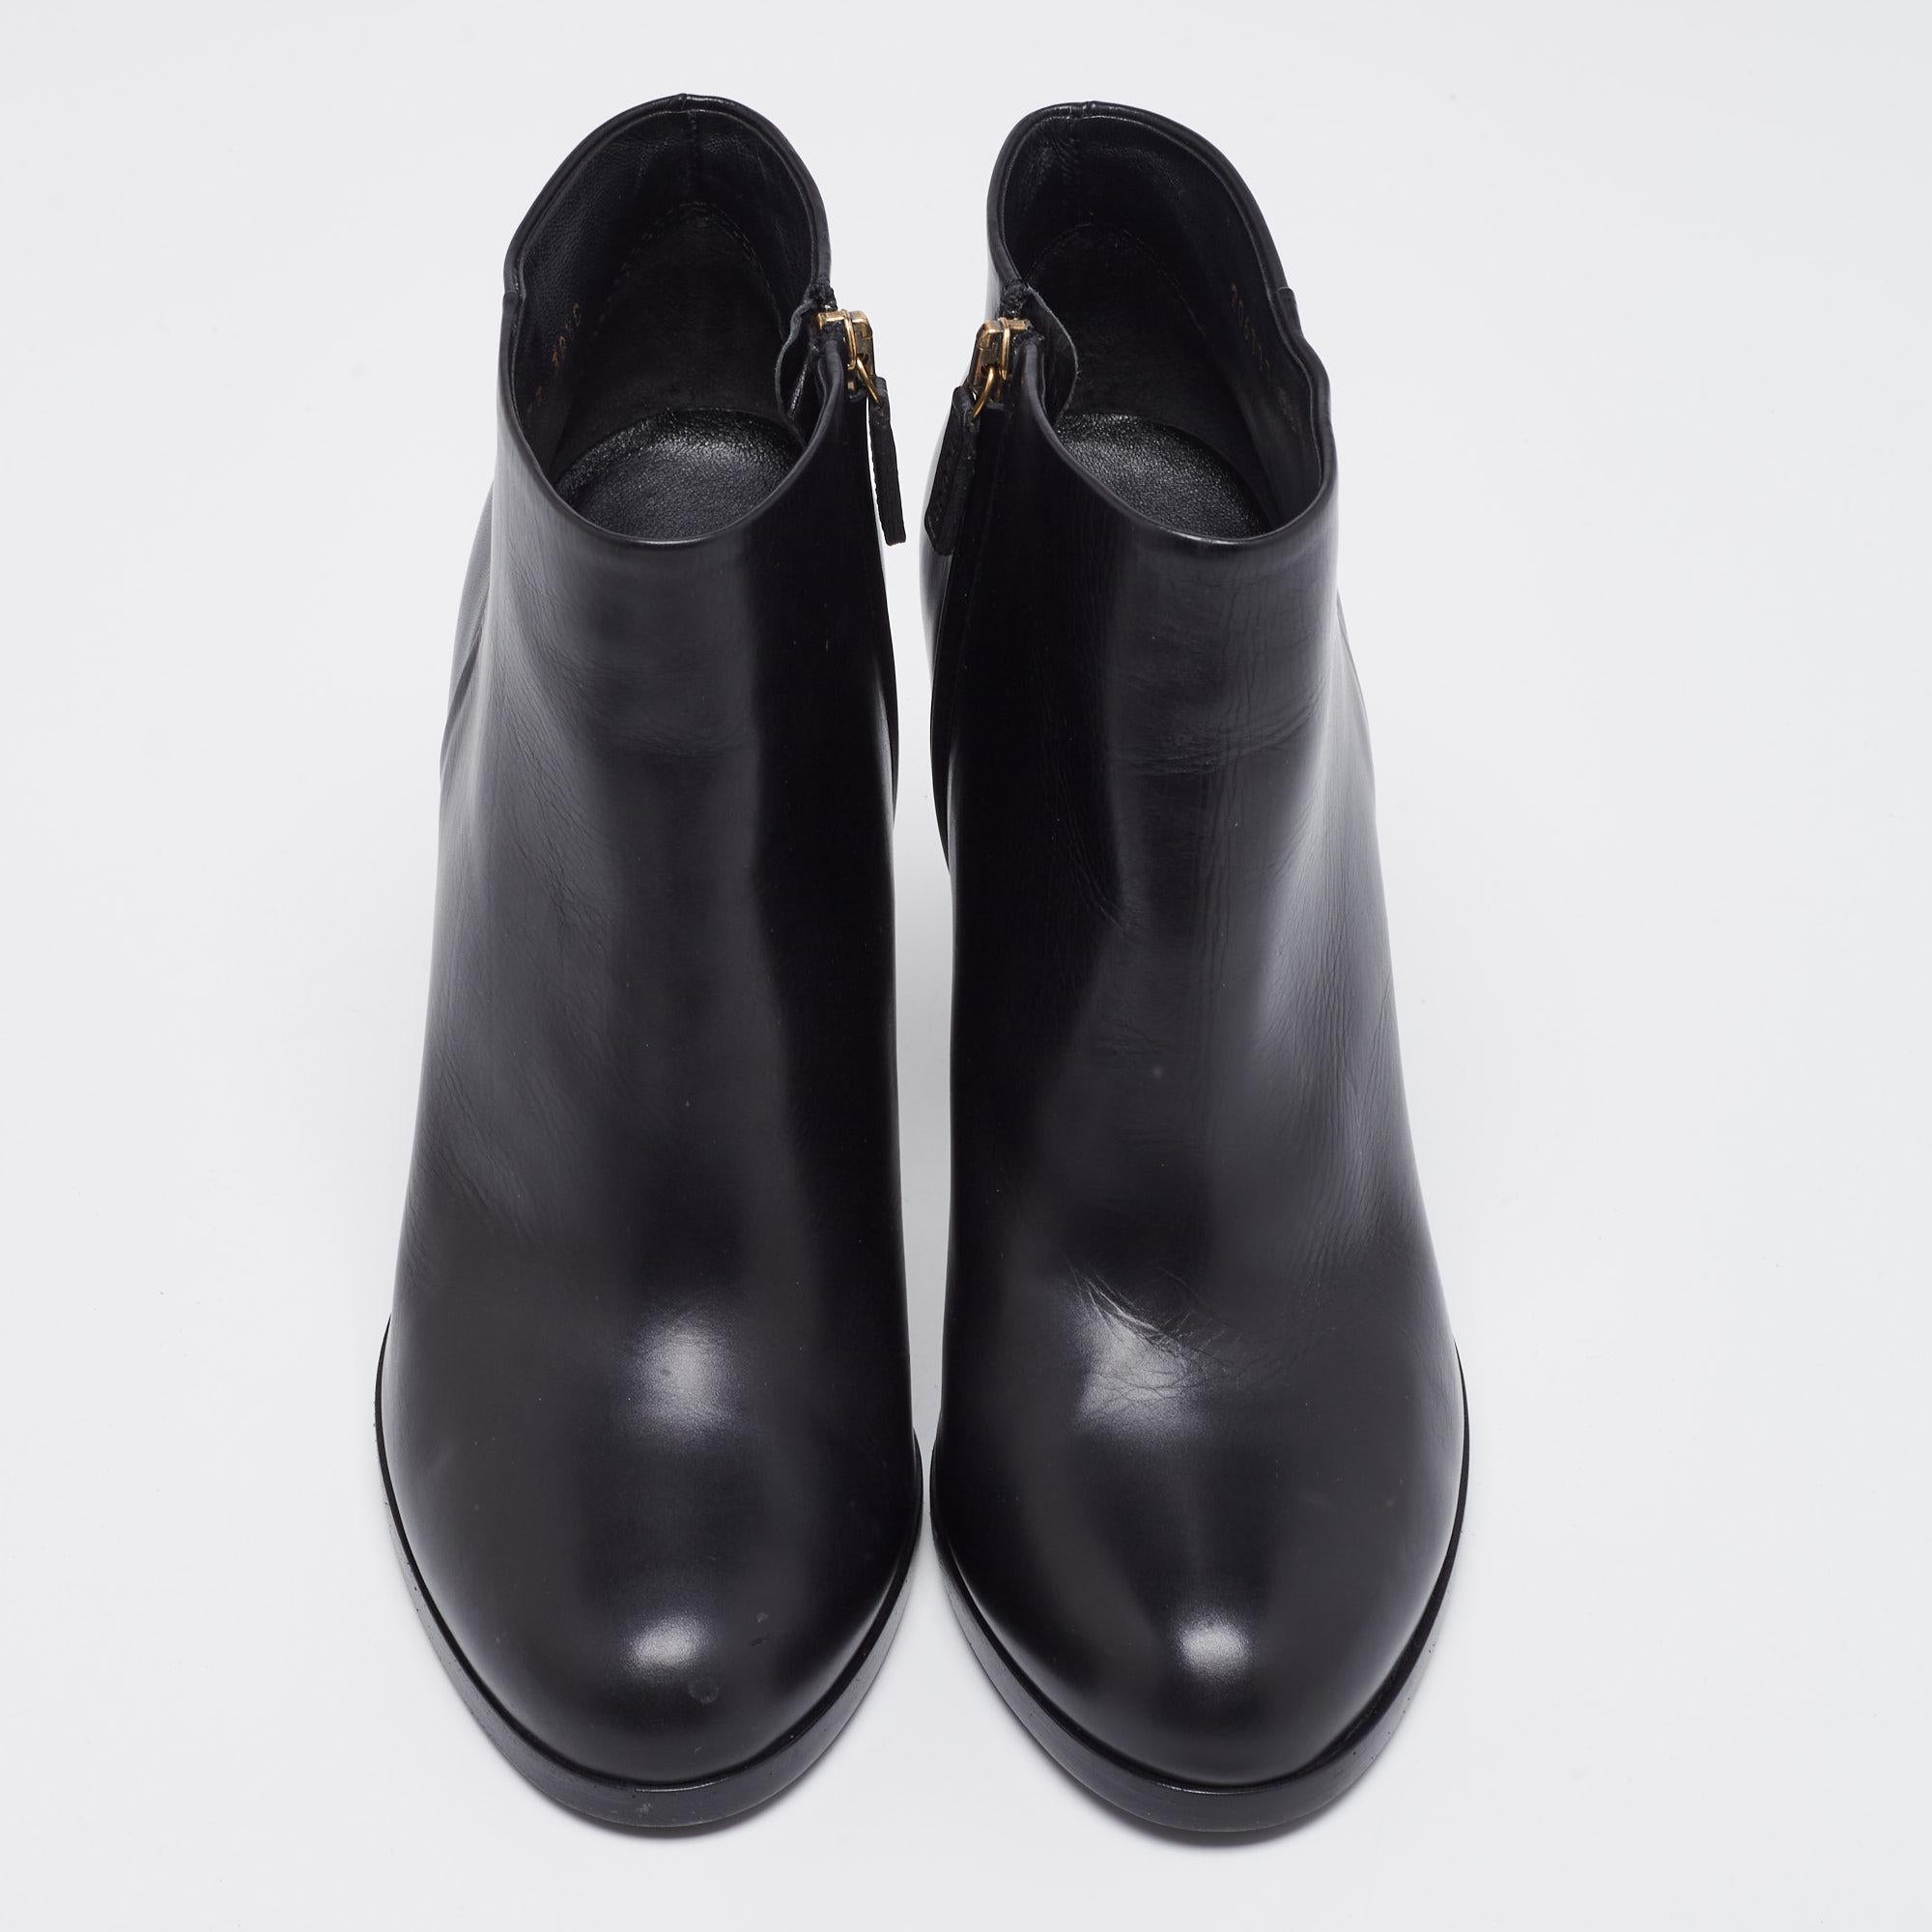 The House of Gucci brings refinement and gracefulness to your wardrobe with these stunning boots. They are made from black leather into an ankle-length silhouette. They flaunt zipper fastening, gold-tone hardware, and block heels. Make your attire